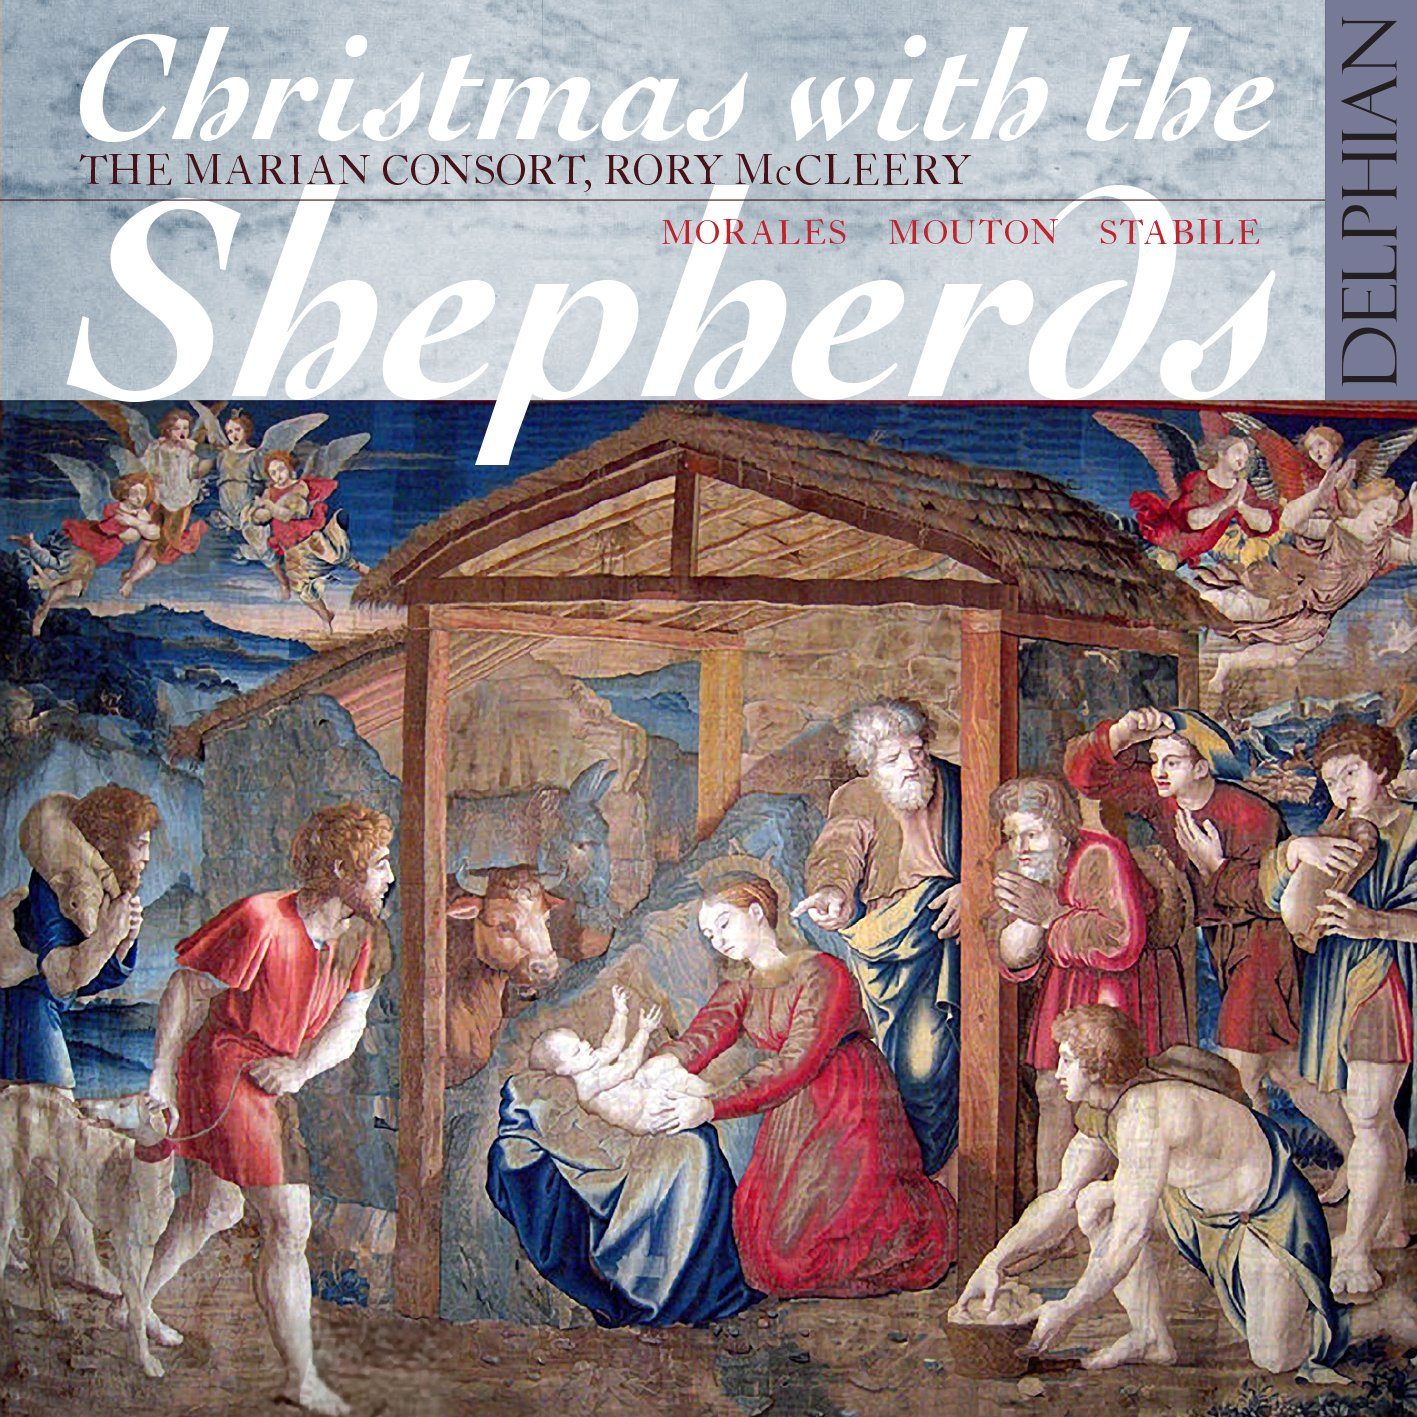 Christmas with the Shepherds: Morales – Mouton – Stabile CD Delphian Records